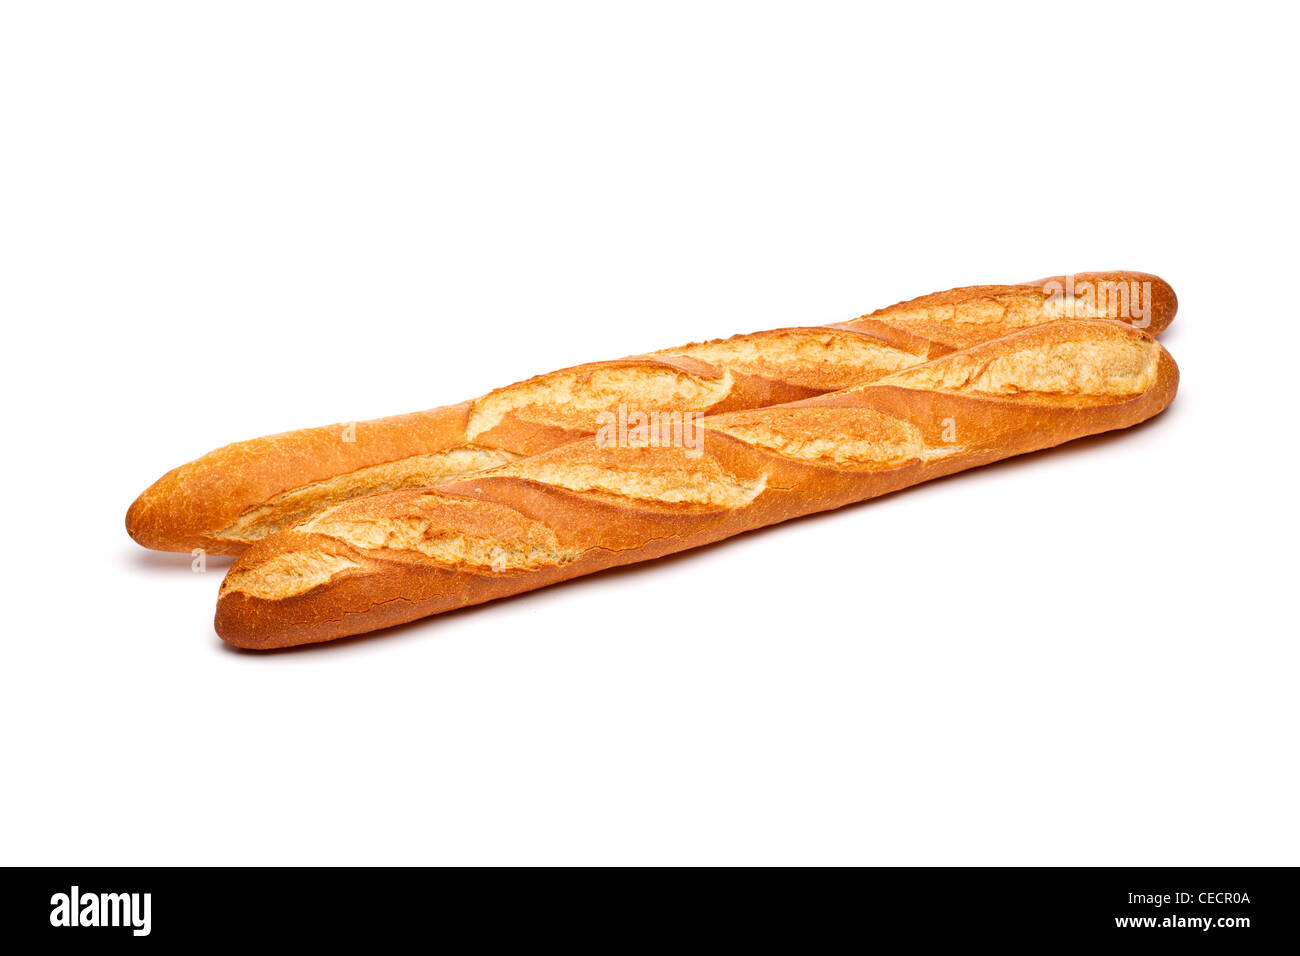 Baguettes on white background Stock Photo